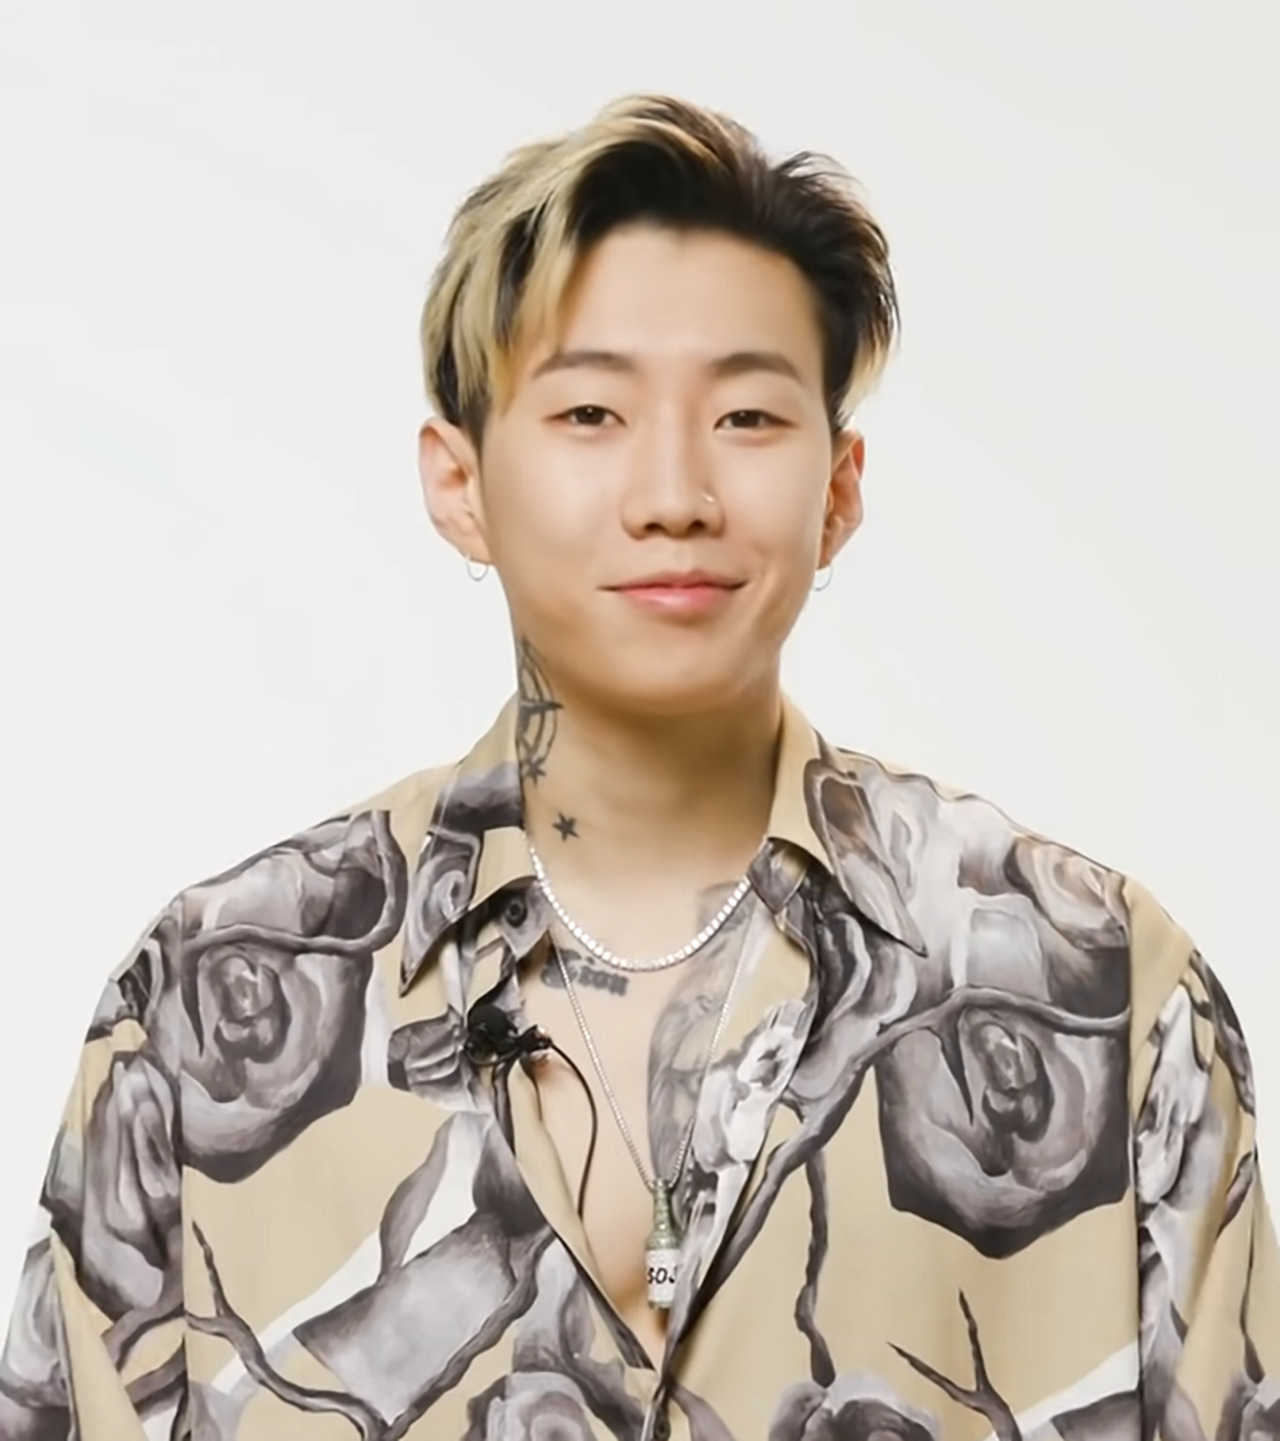 25th Apr | 🎂 HAPPY BIRTHDAY JAY! ♡Thank you for always taking care of AOMG & H1gher artists, i hope all the love you give is retributed, today and always. hope you are staying healthy and taking care of yourself. be happy, always. i love and appreciate you, best of wishes✨ #jay park#khh#khiphop#aomg#h1gher music#birthdays#park jaebeom